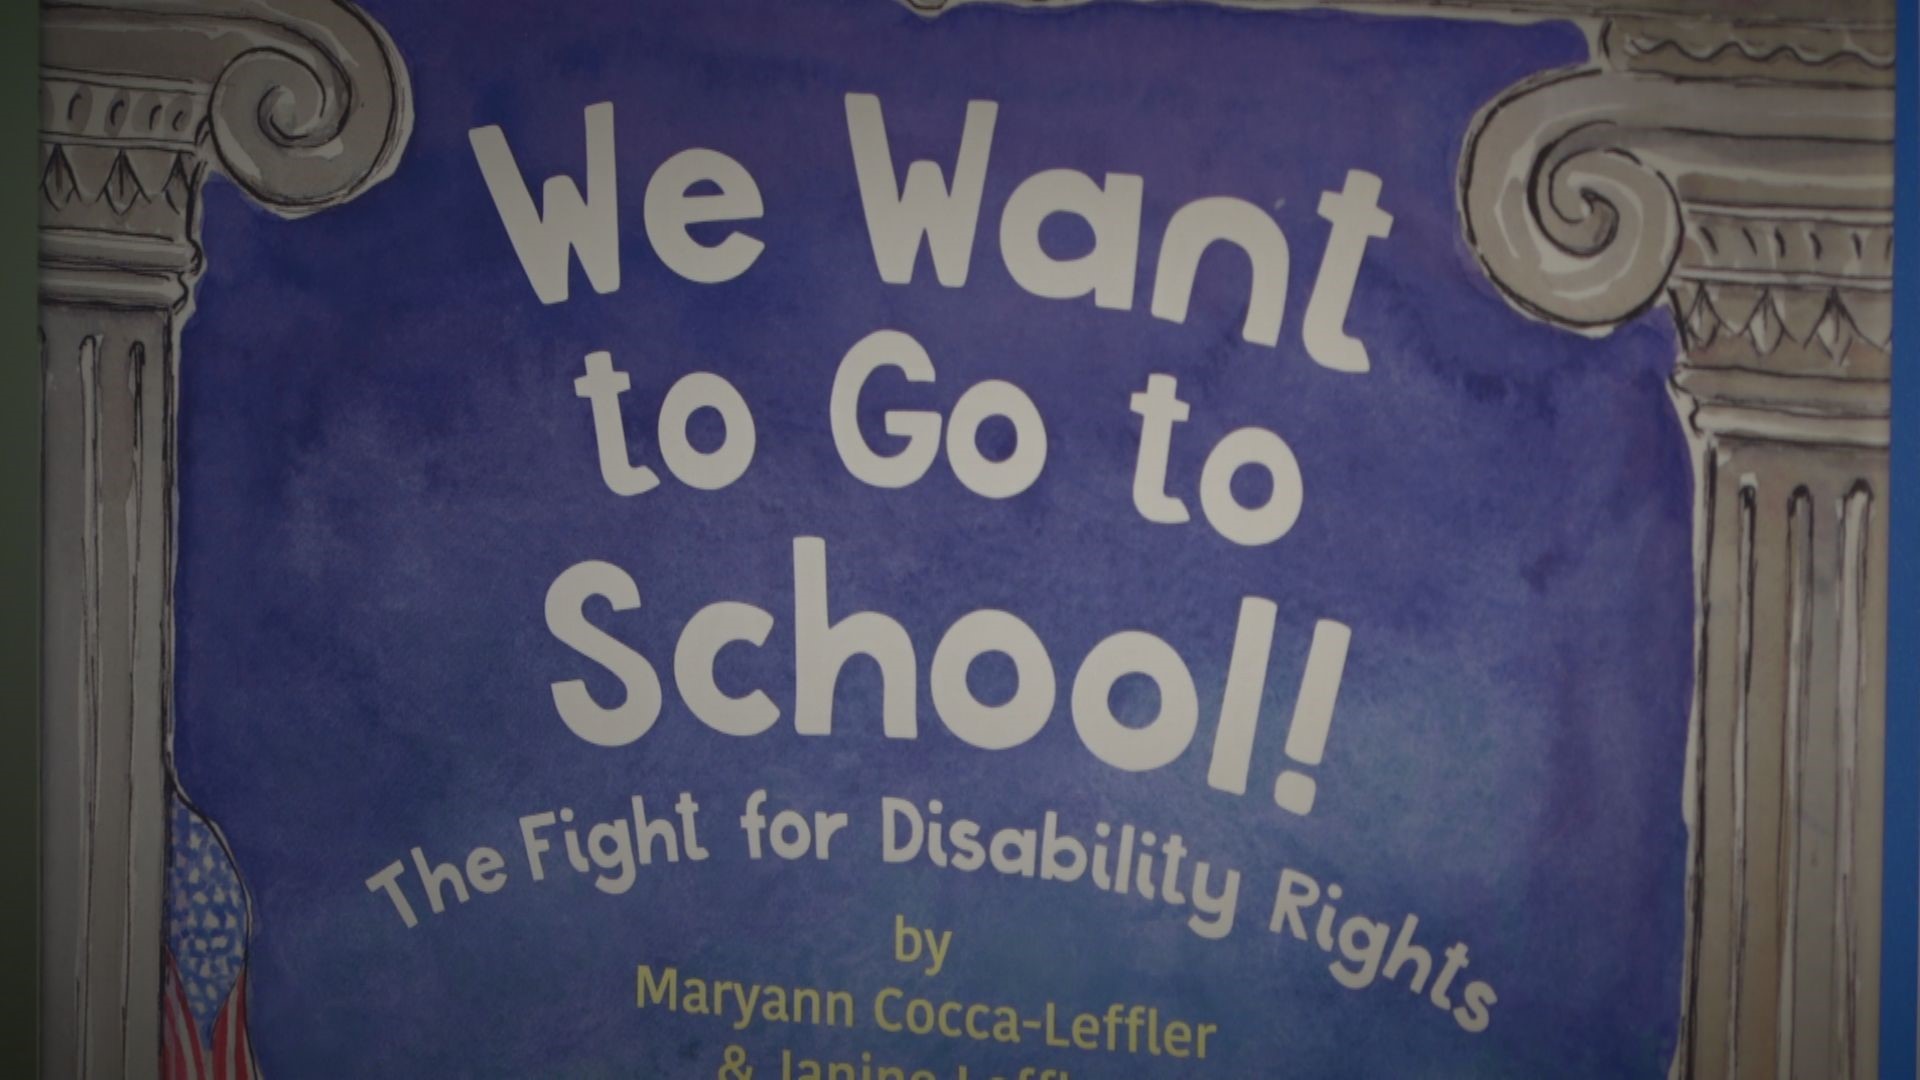 Maryann Cocca-Leffler teamed up with her daughter, Janine Leffler who has cerebral palsy, to write a children's book about the fight for disability rights.